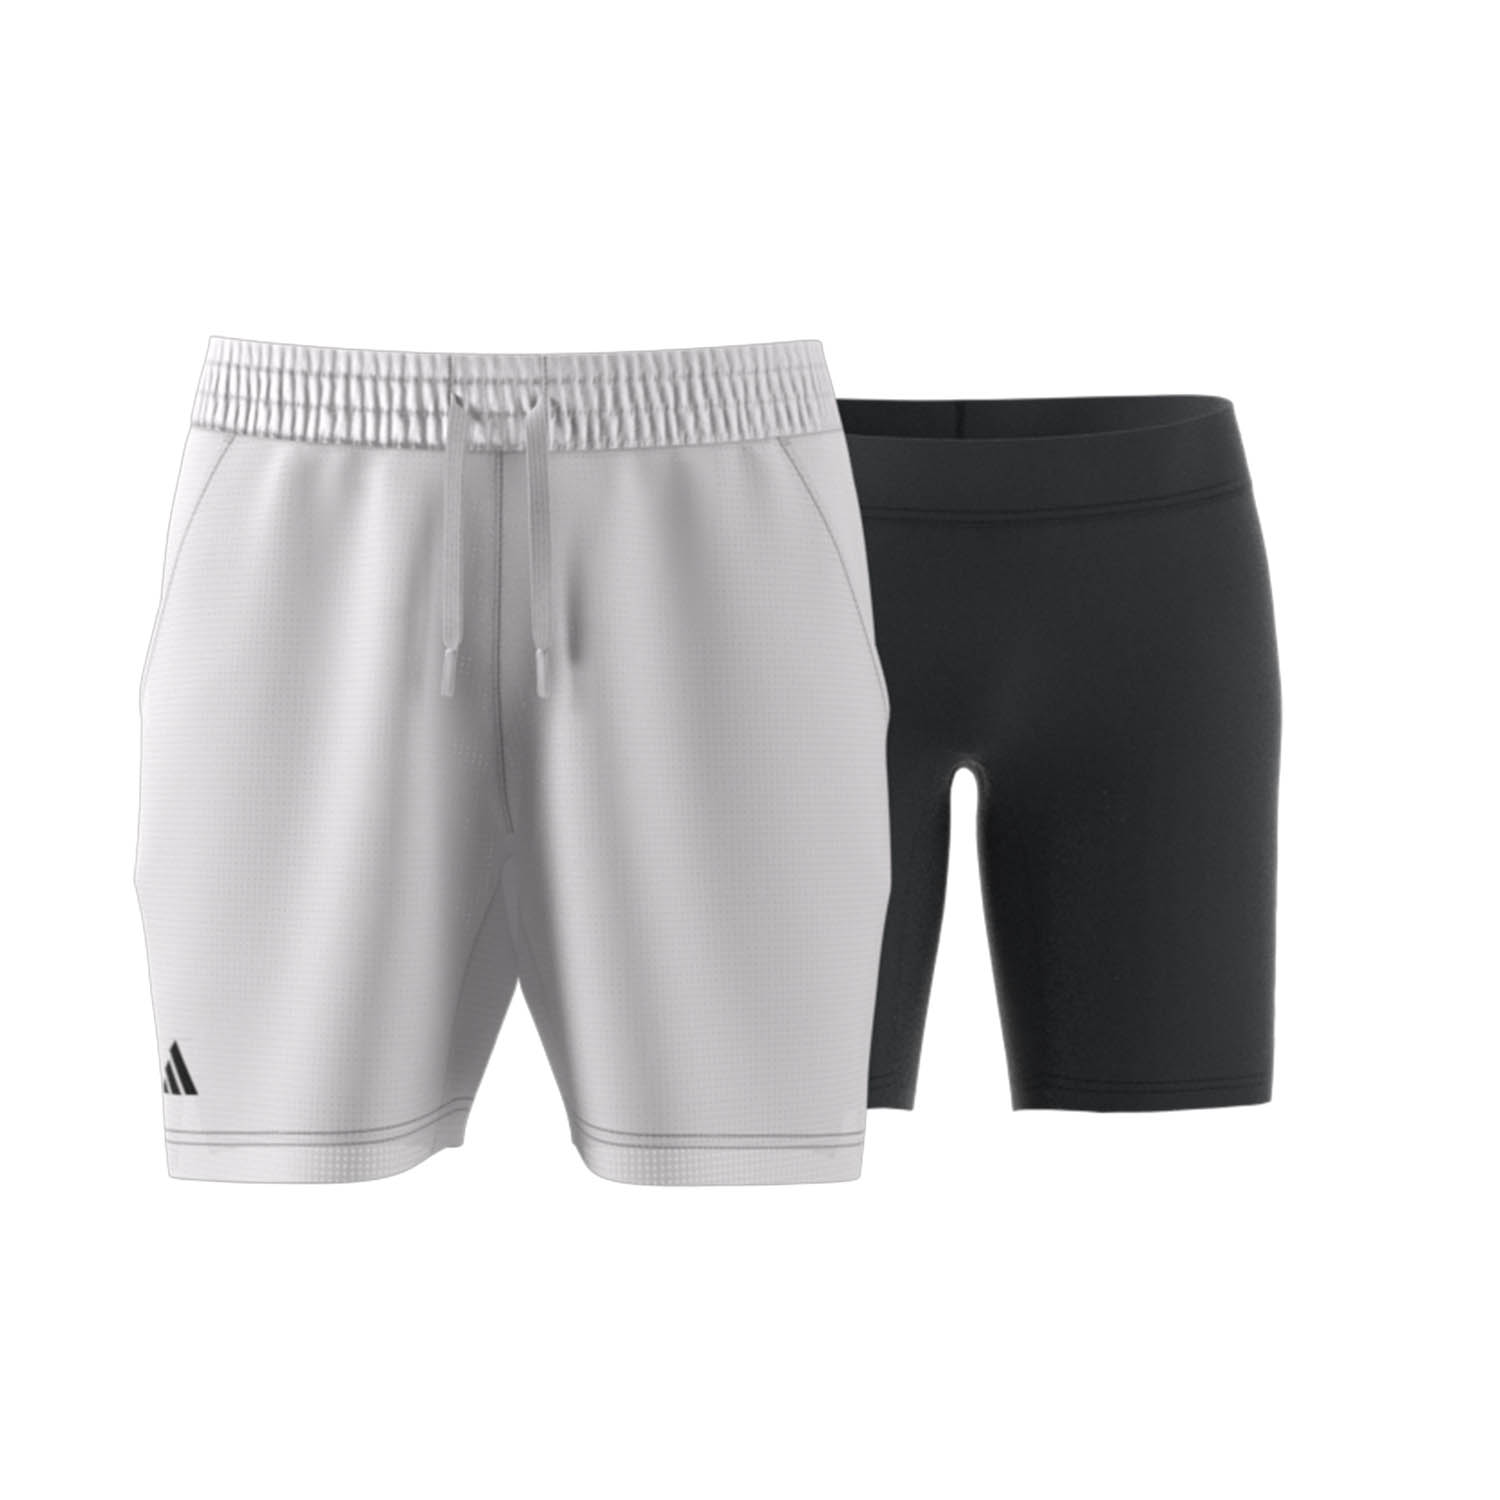 adidas HEAT.RDY 2 in 1 7in Shorts - Grey One/Carbon